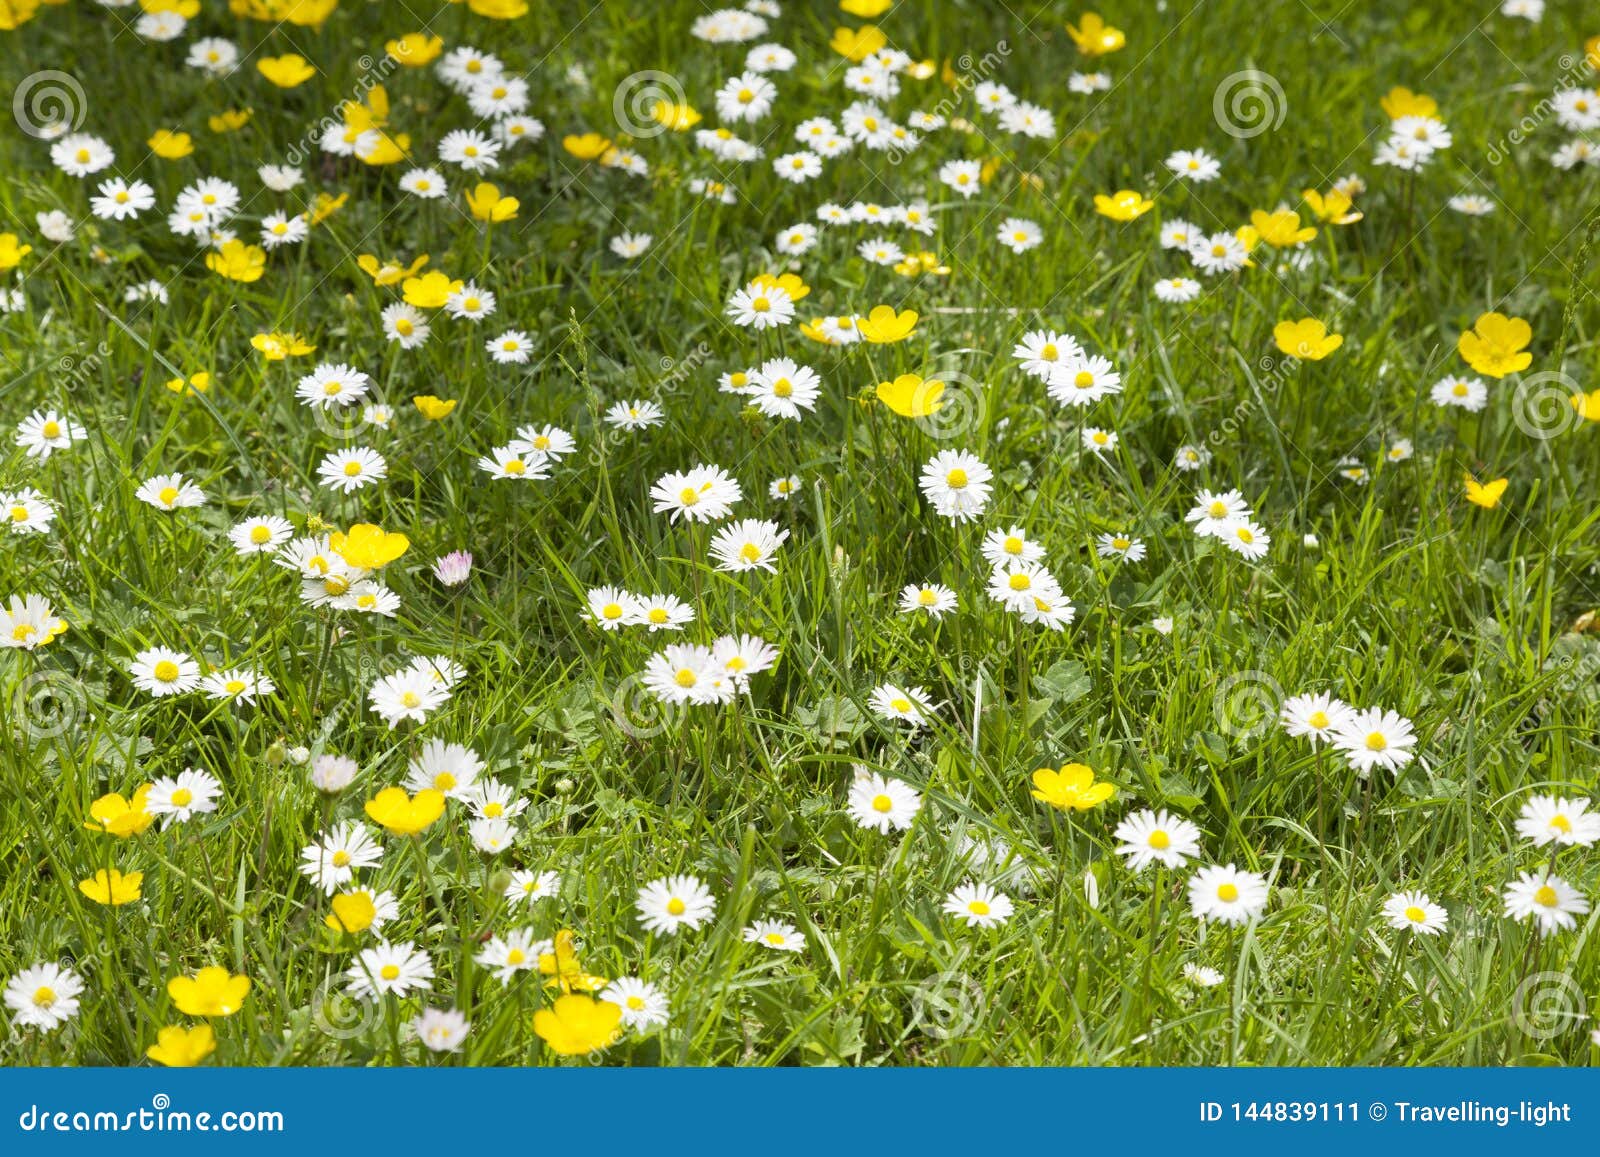 buttercups and daisises